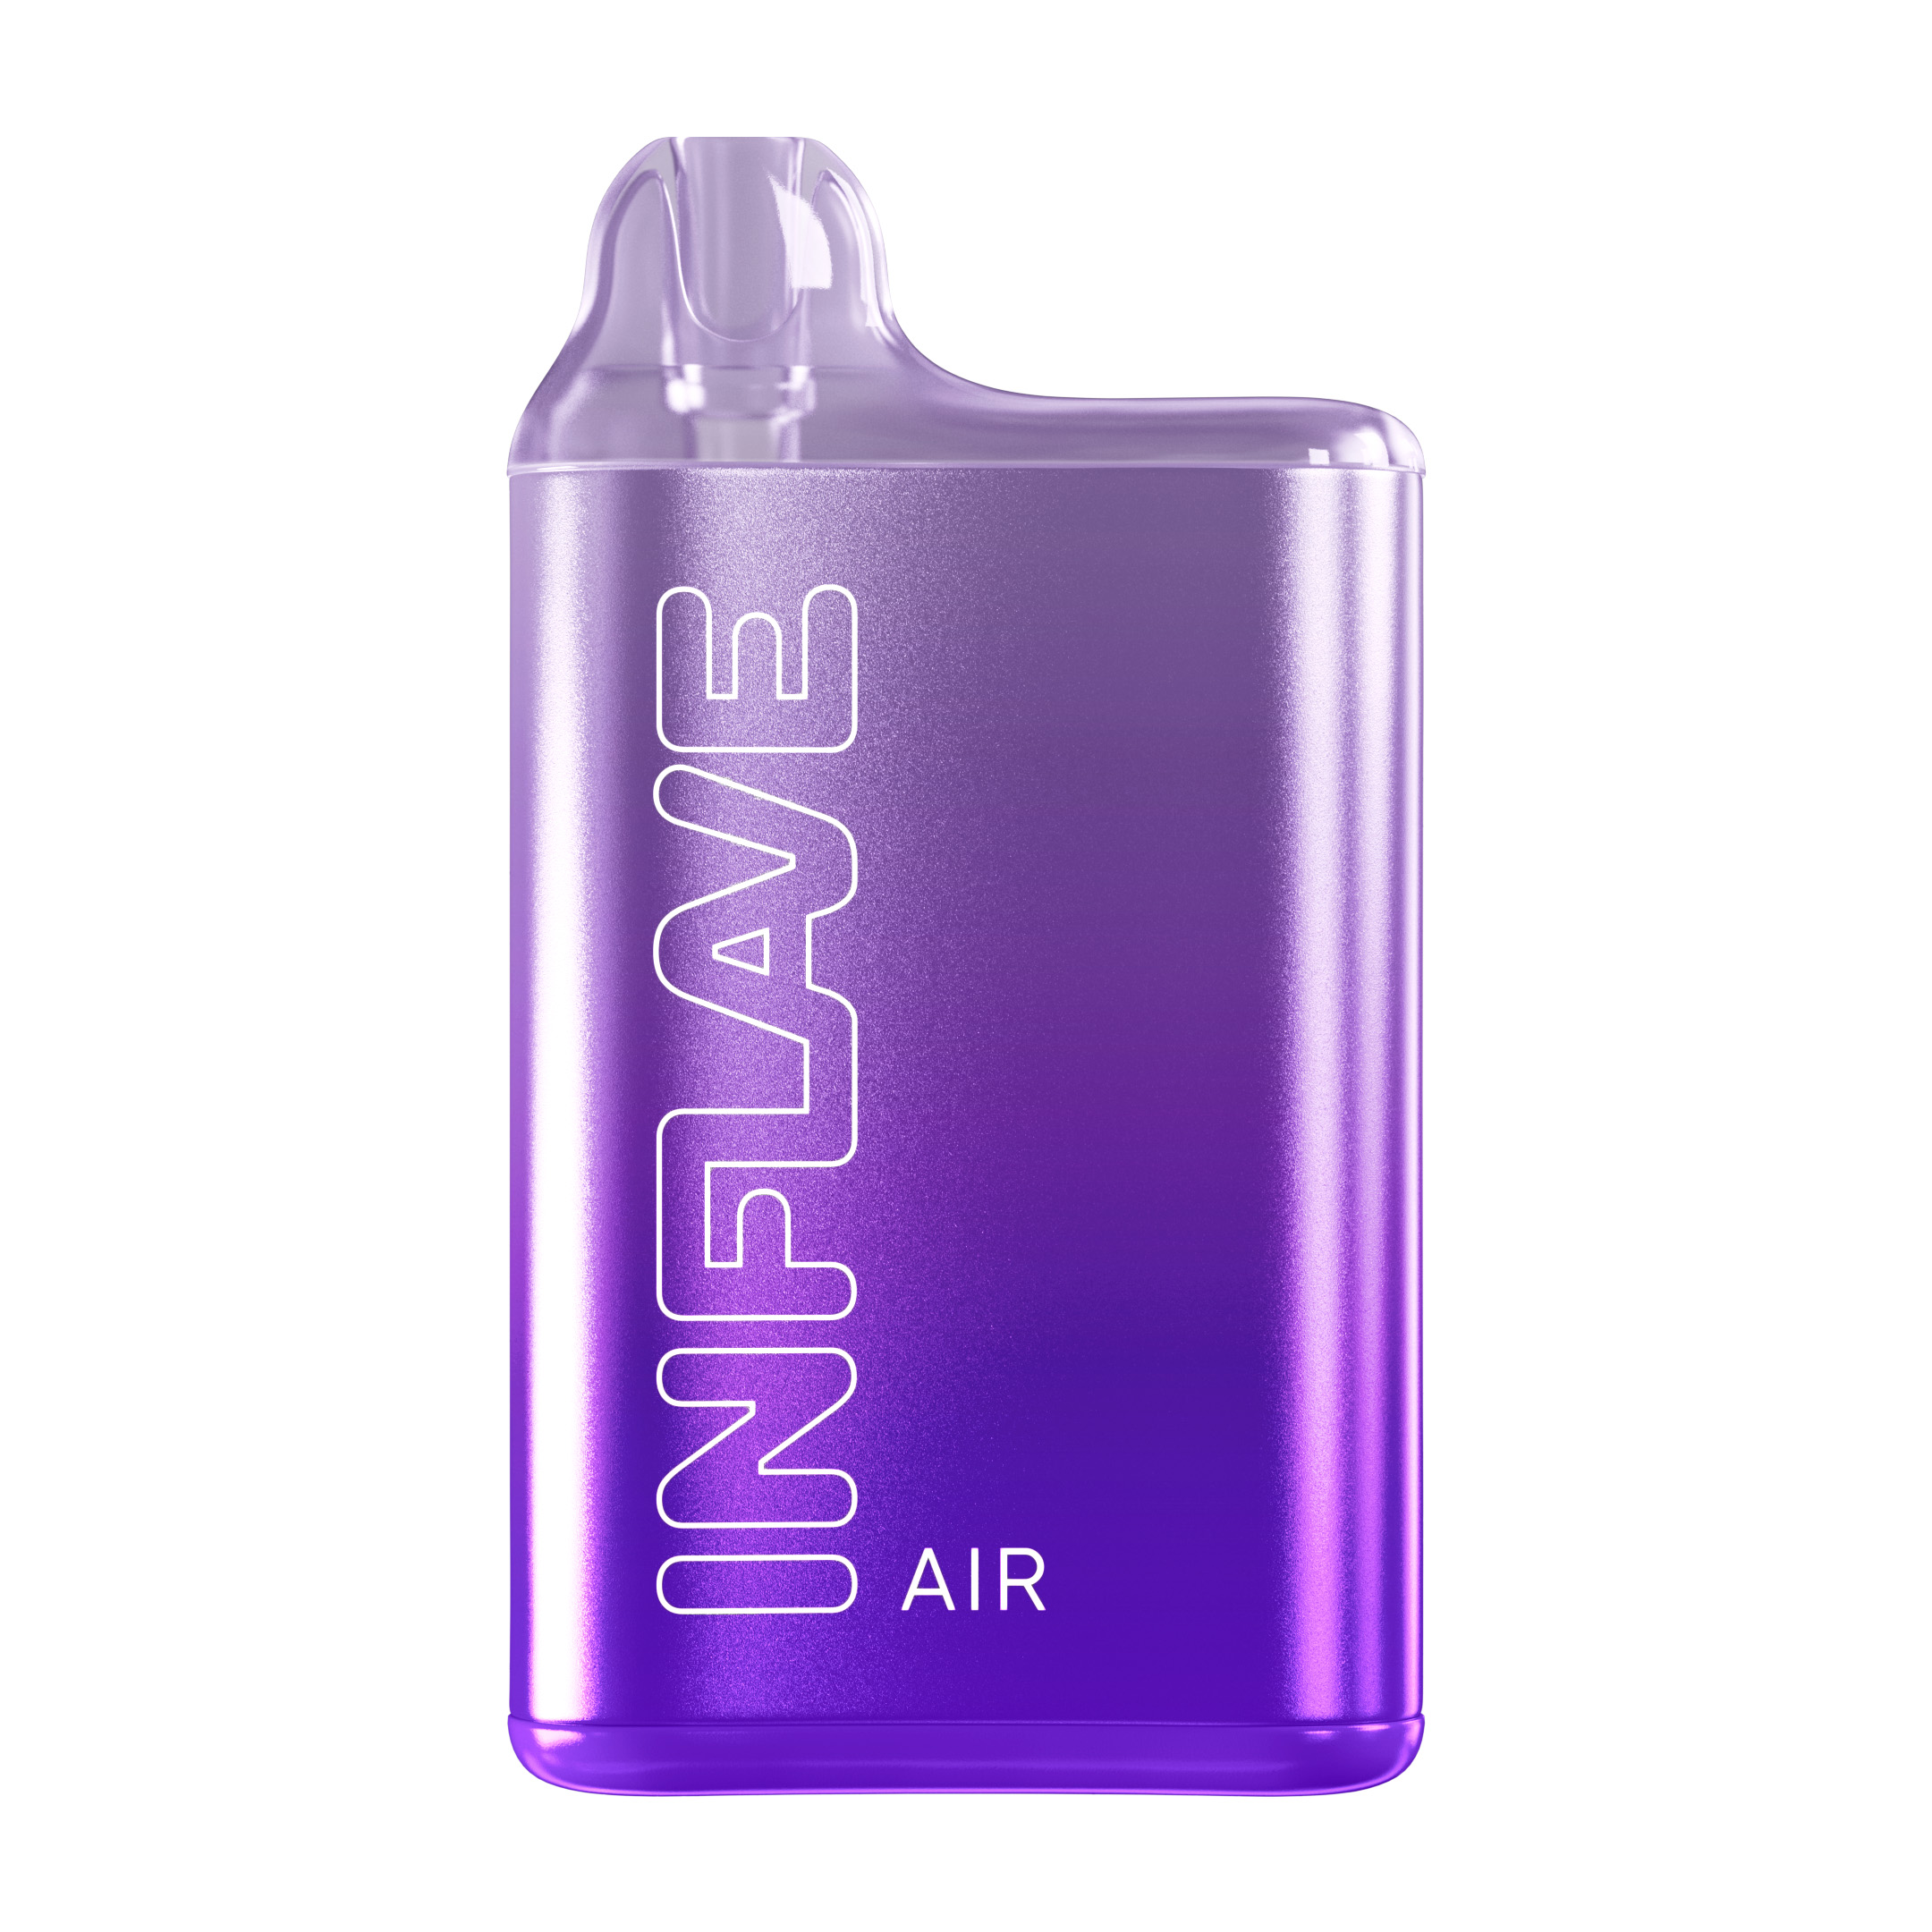 Inflave air. Inflave 6000. Эл. Сигарета Inflave Air (6000). Air 6000 Одноразка. Inflave Air 6000 Дикие ягоды.